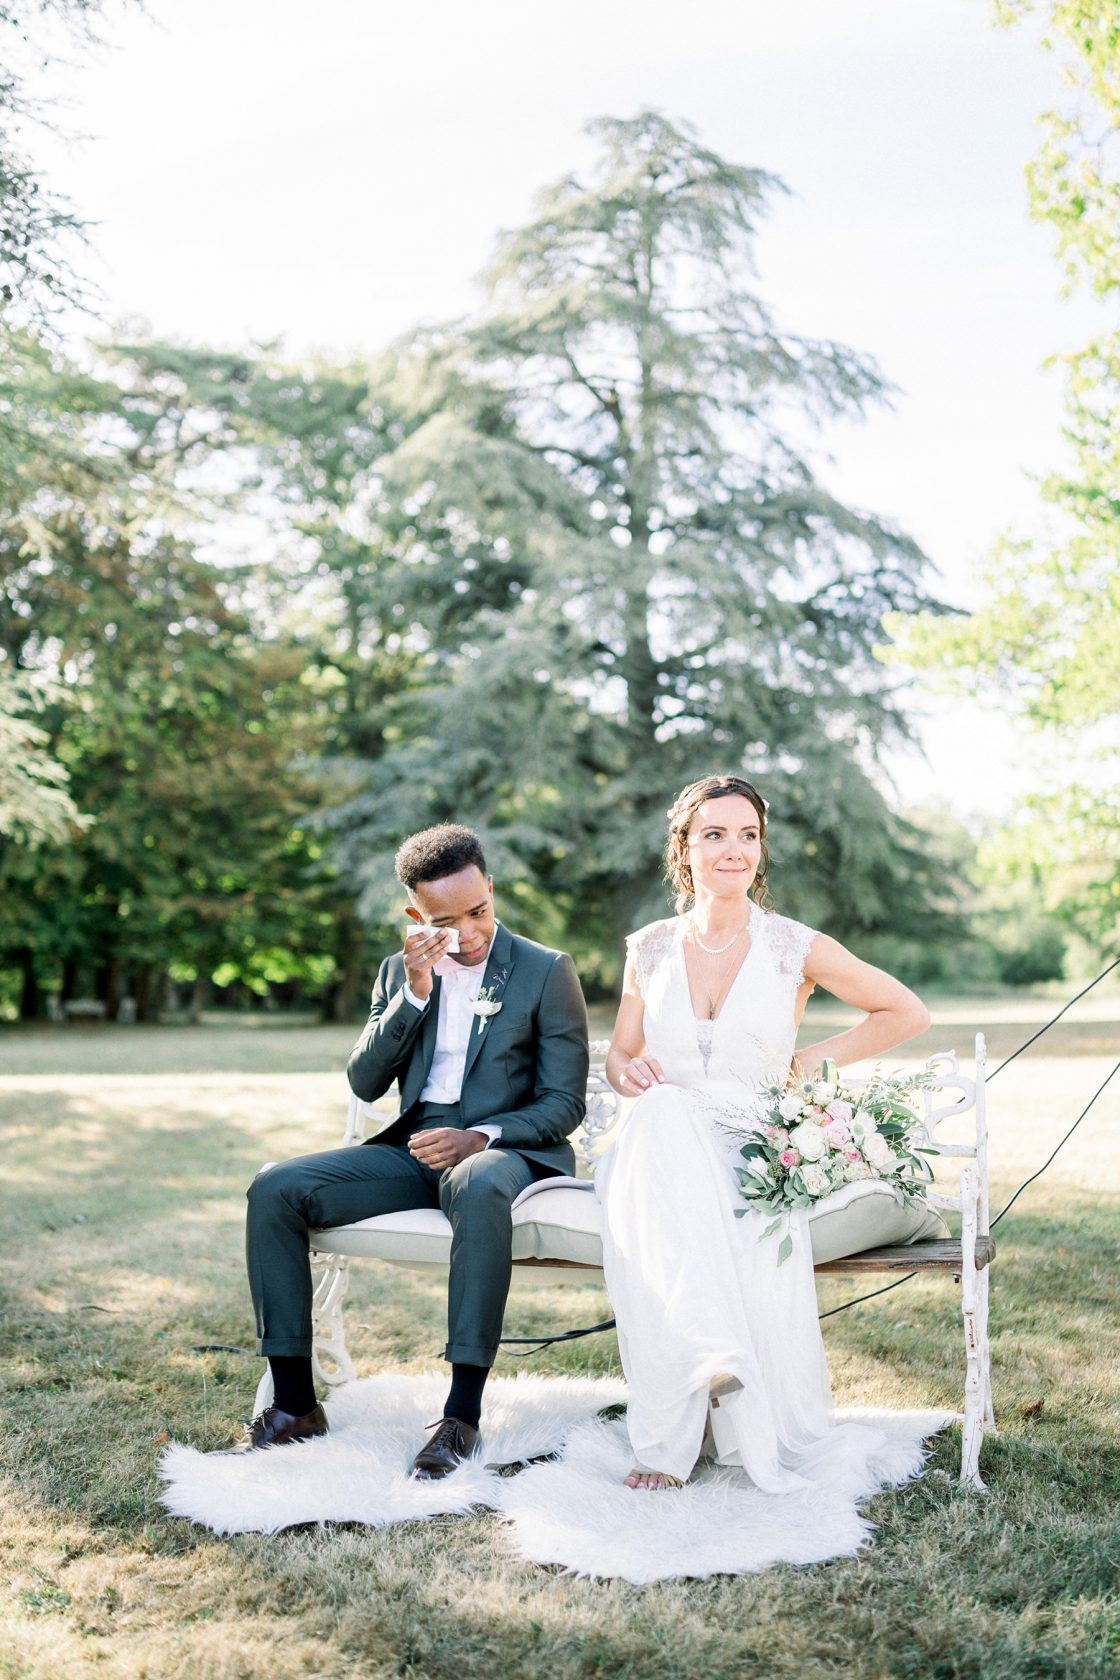 French Chateau Wedding Inspired by Nature Romain Vaucher12